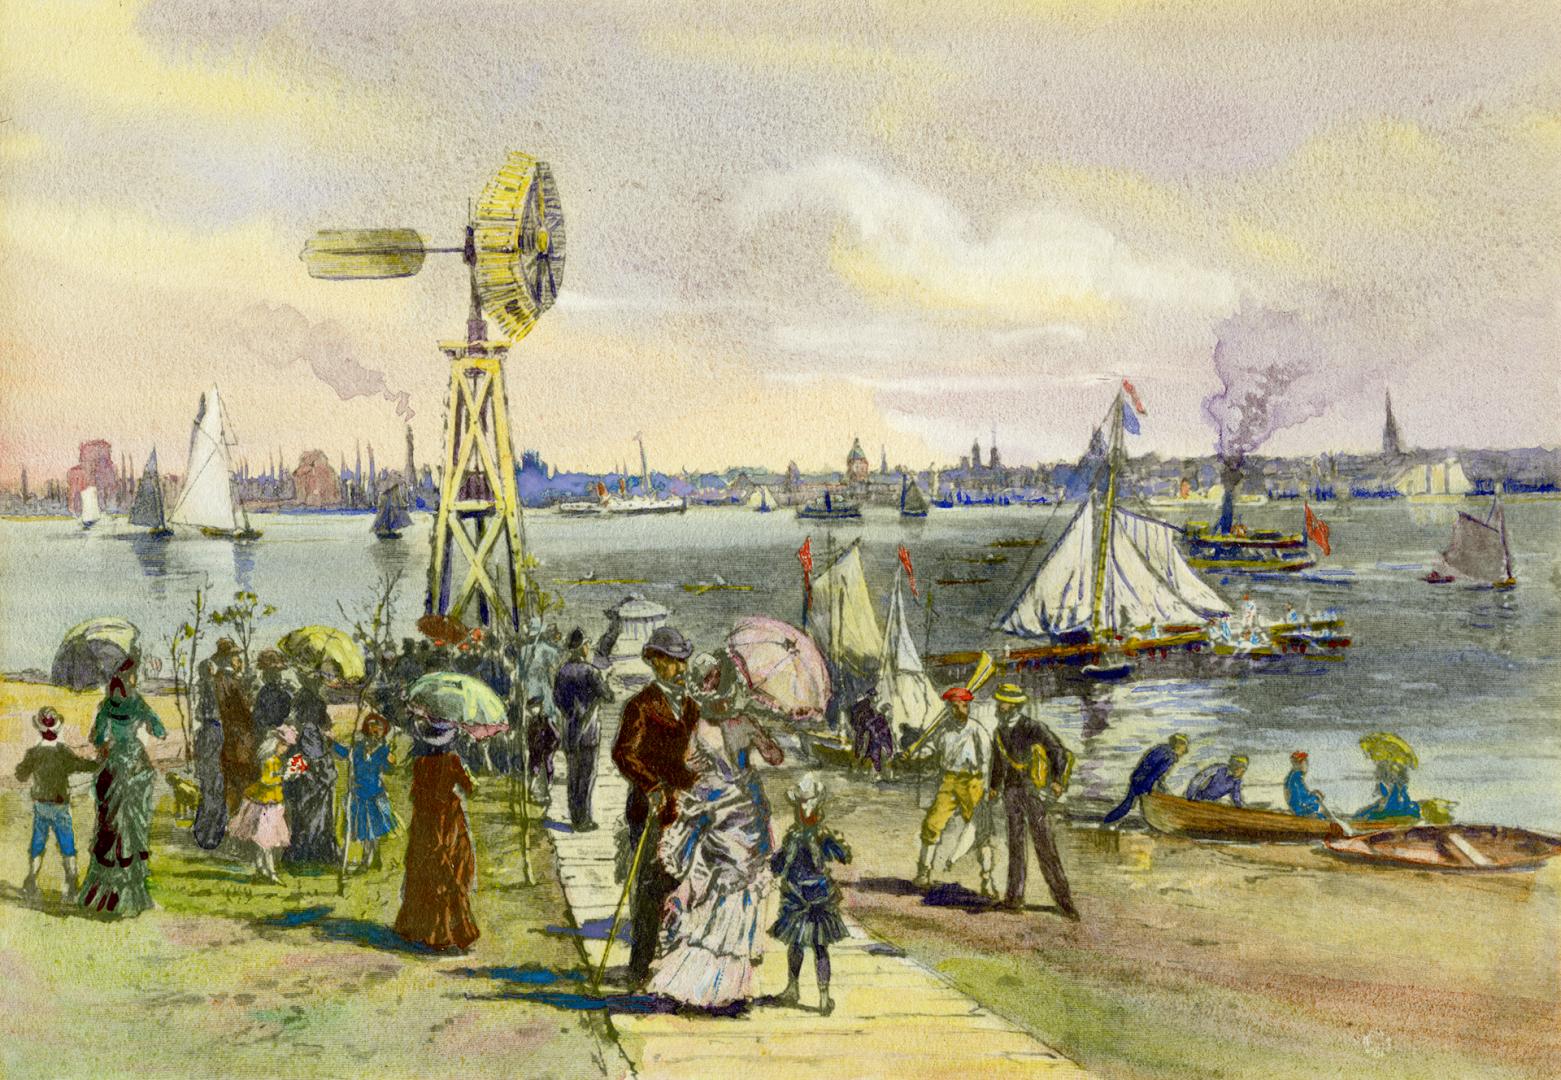 Painting shows a lot of people on the Toronto Island with the Harbour in the background.